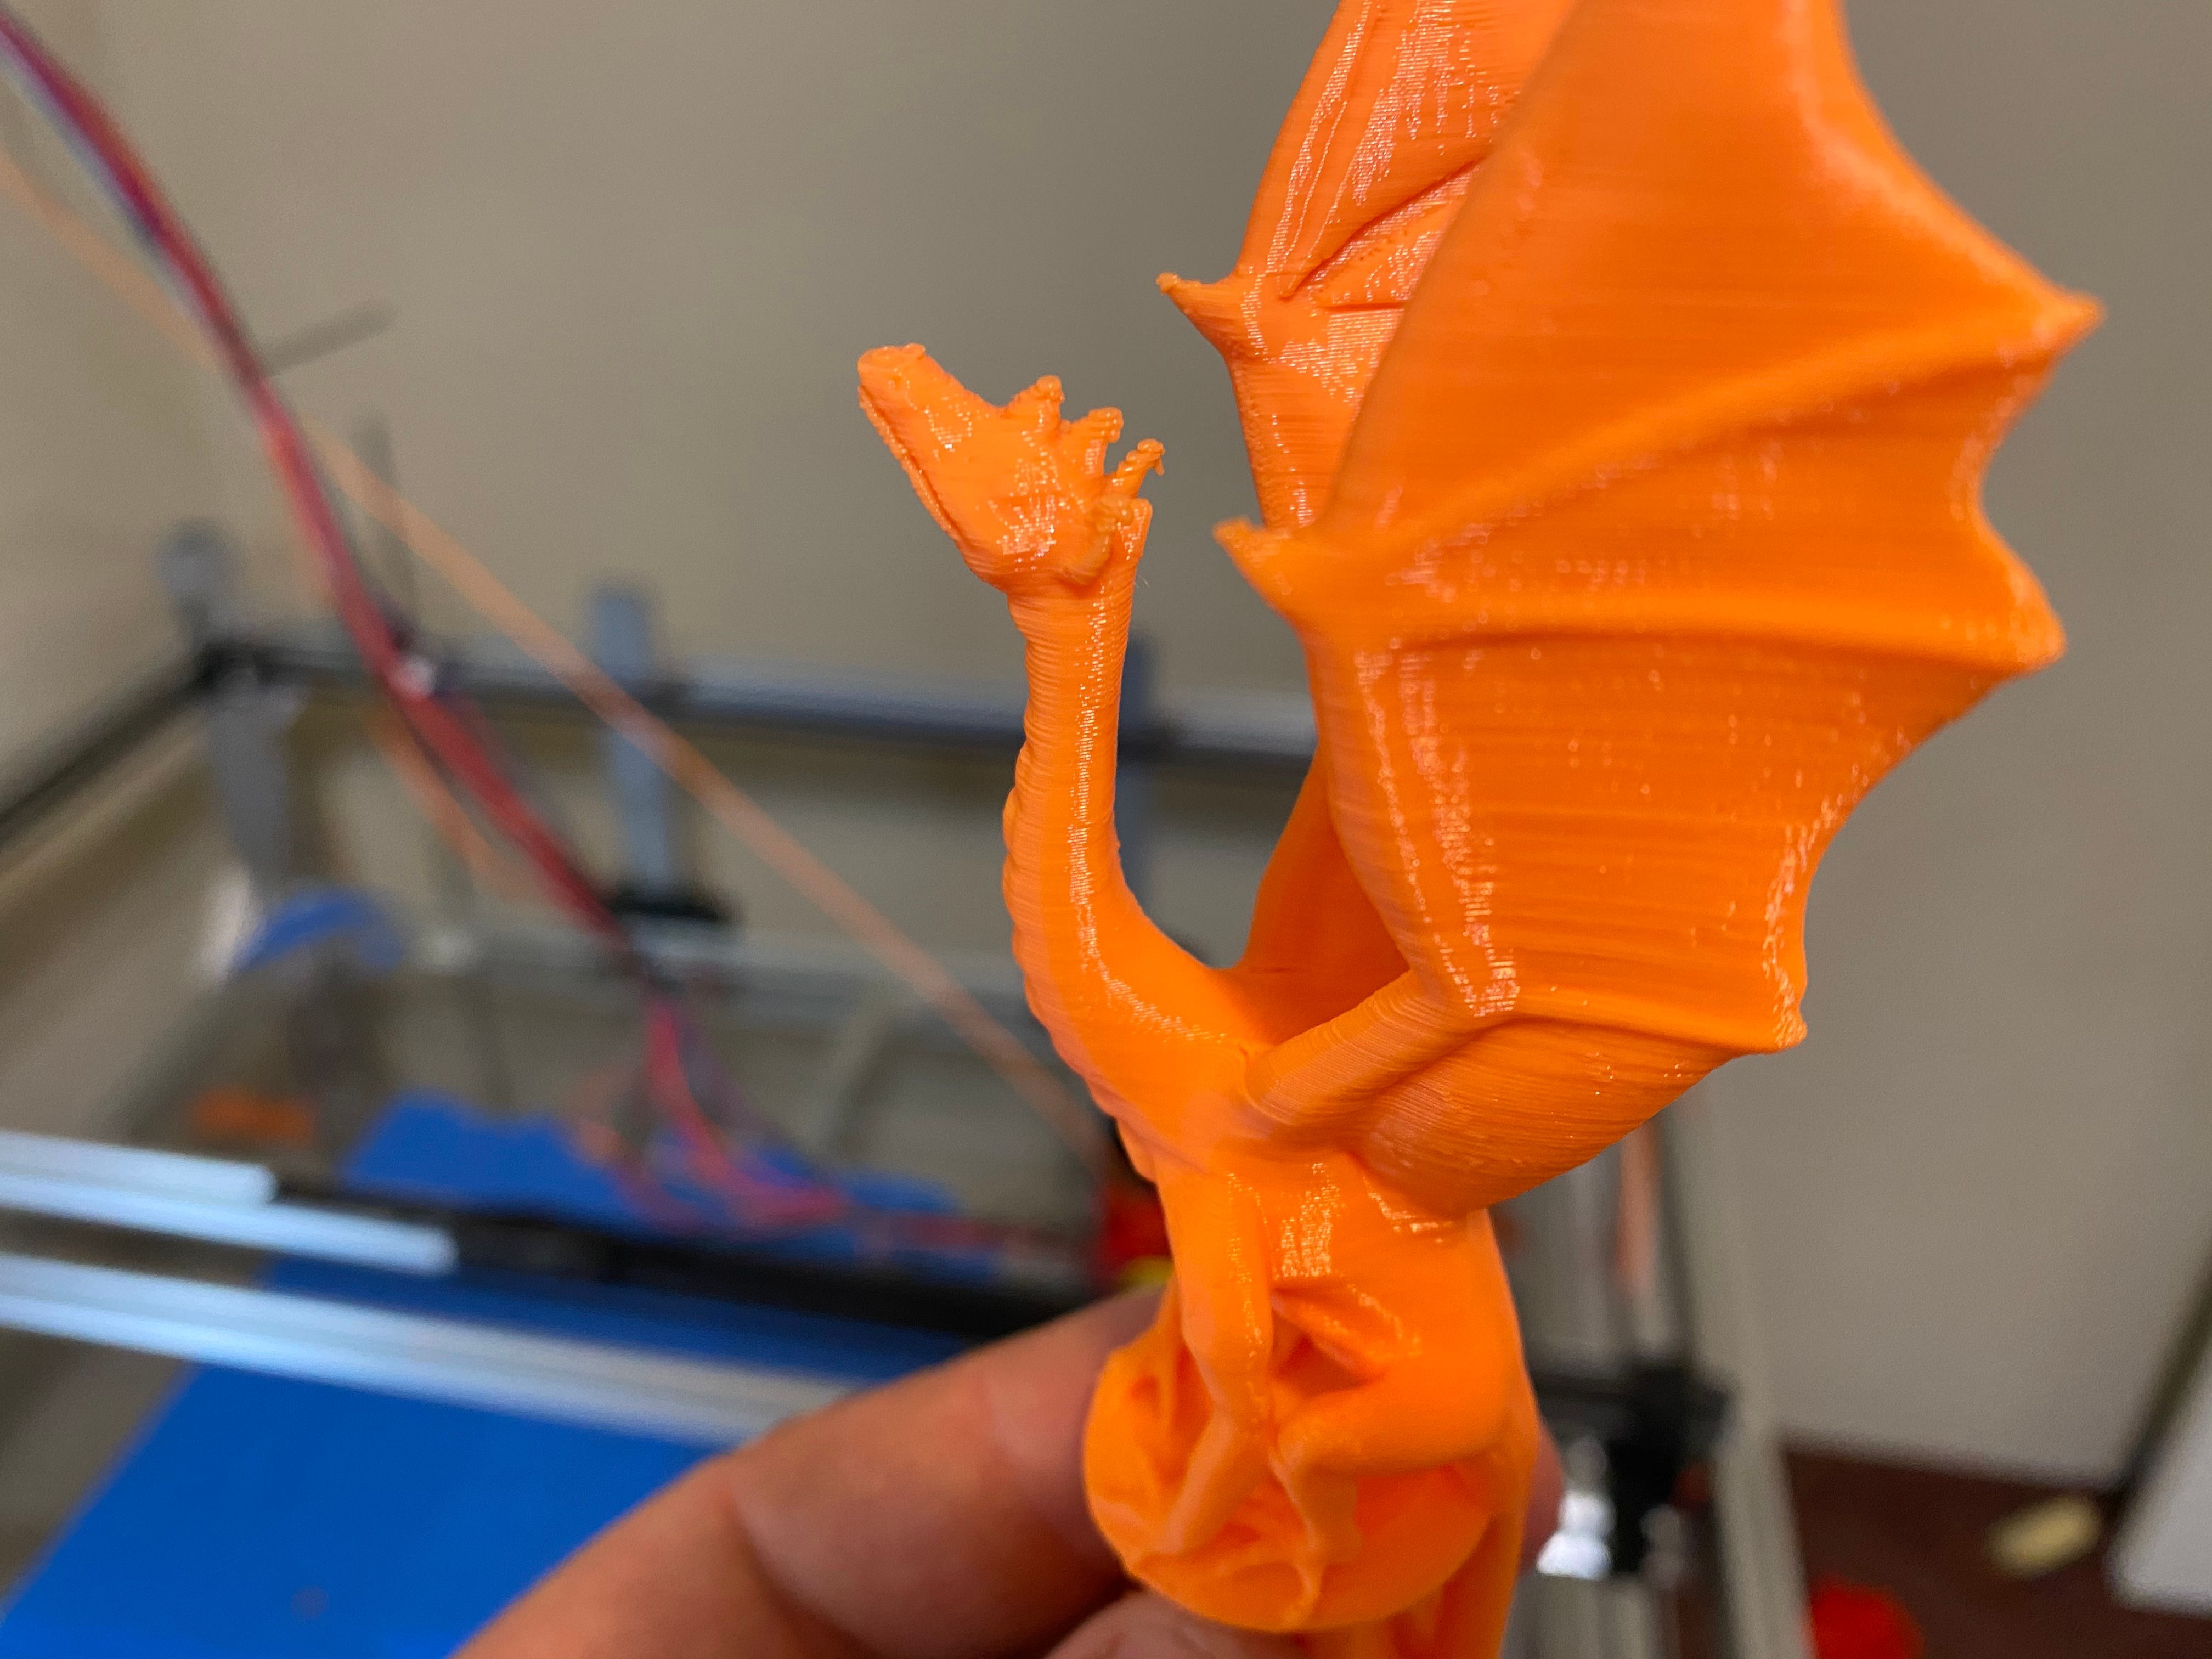 Pokemon - Mega Charizard X with cuts and as a whole 3D model 3D printable